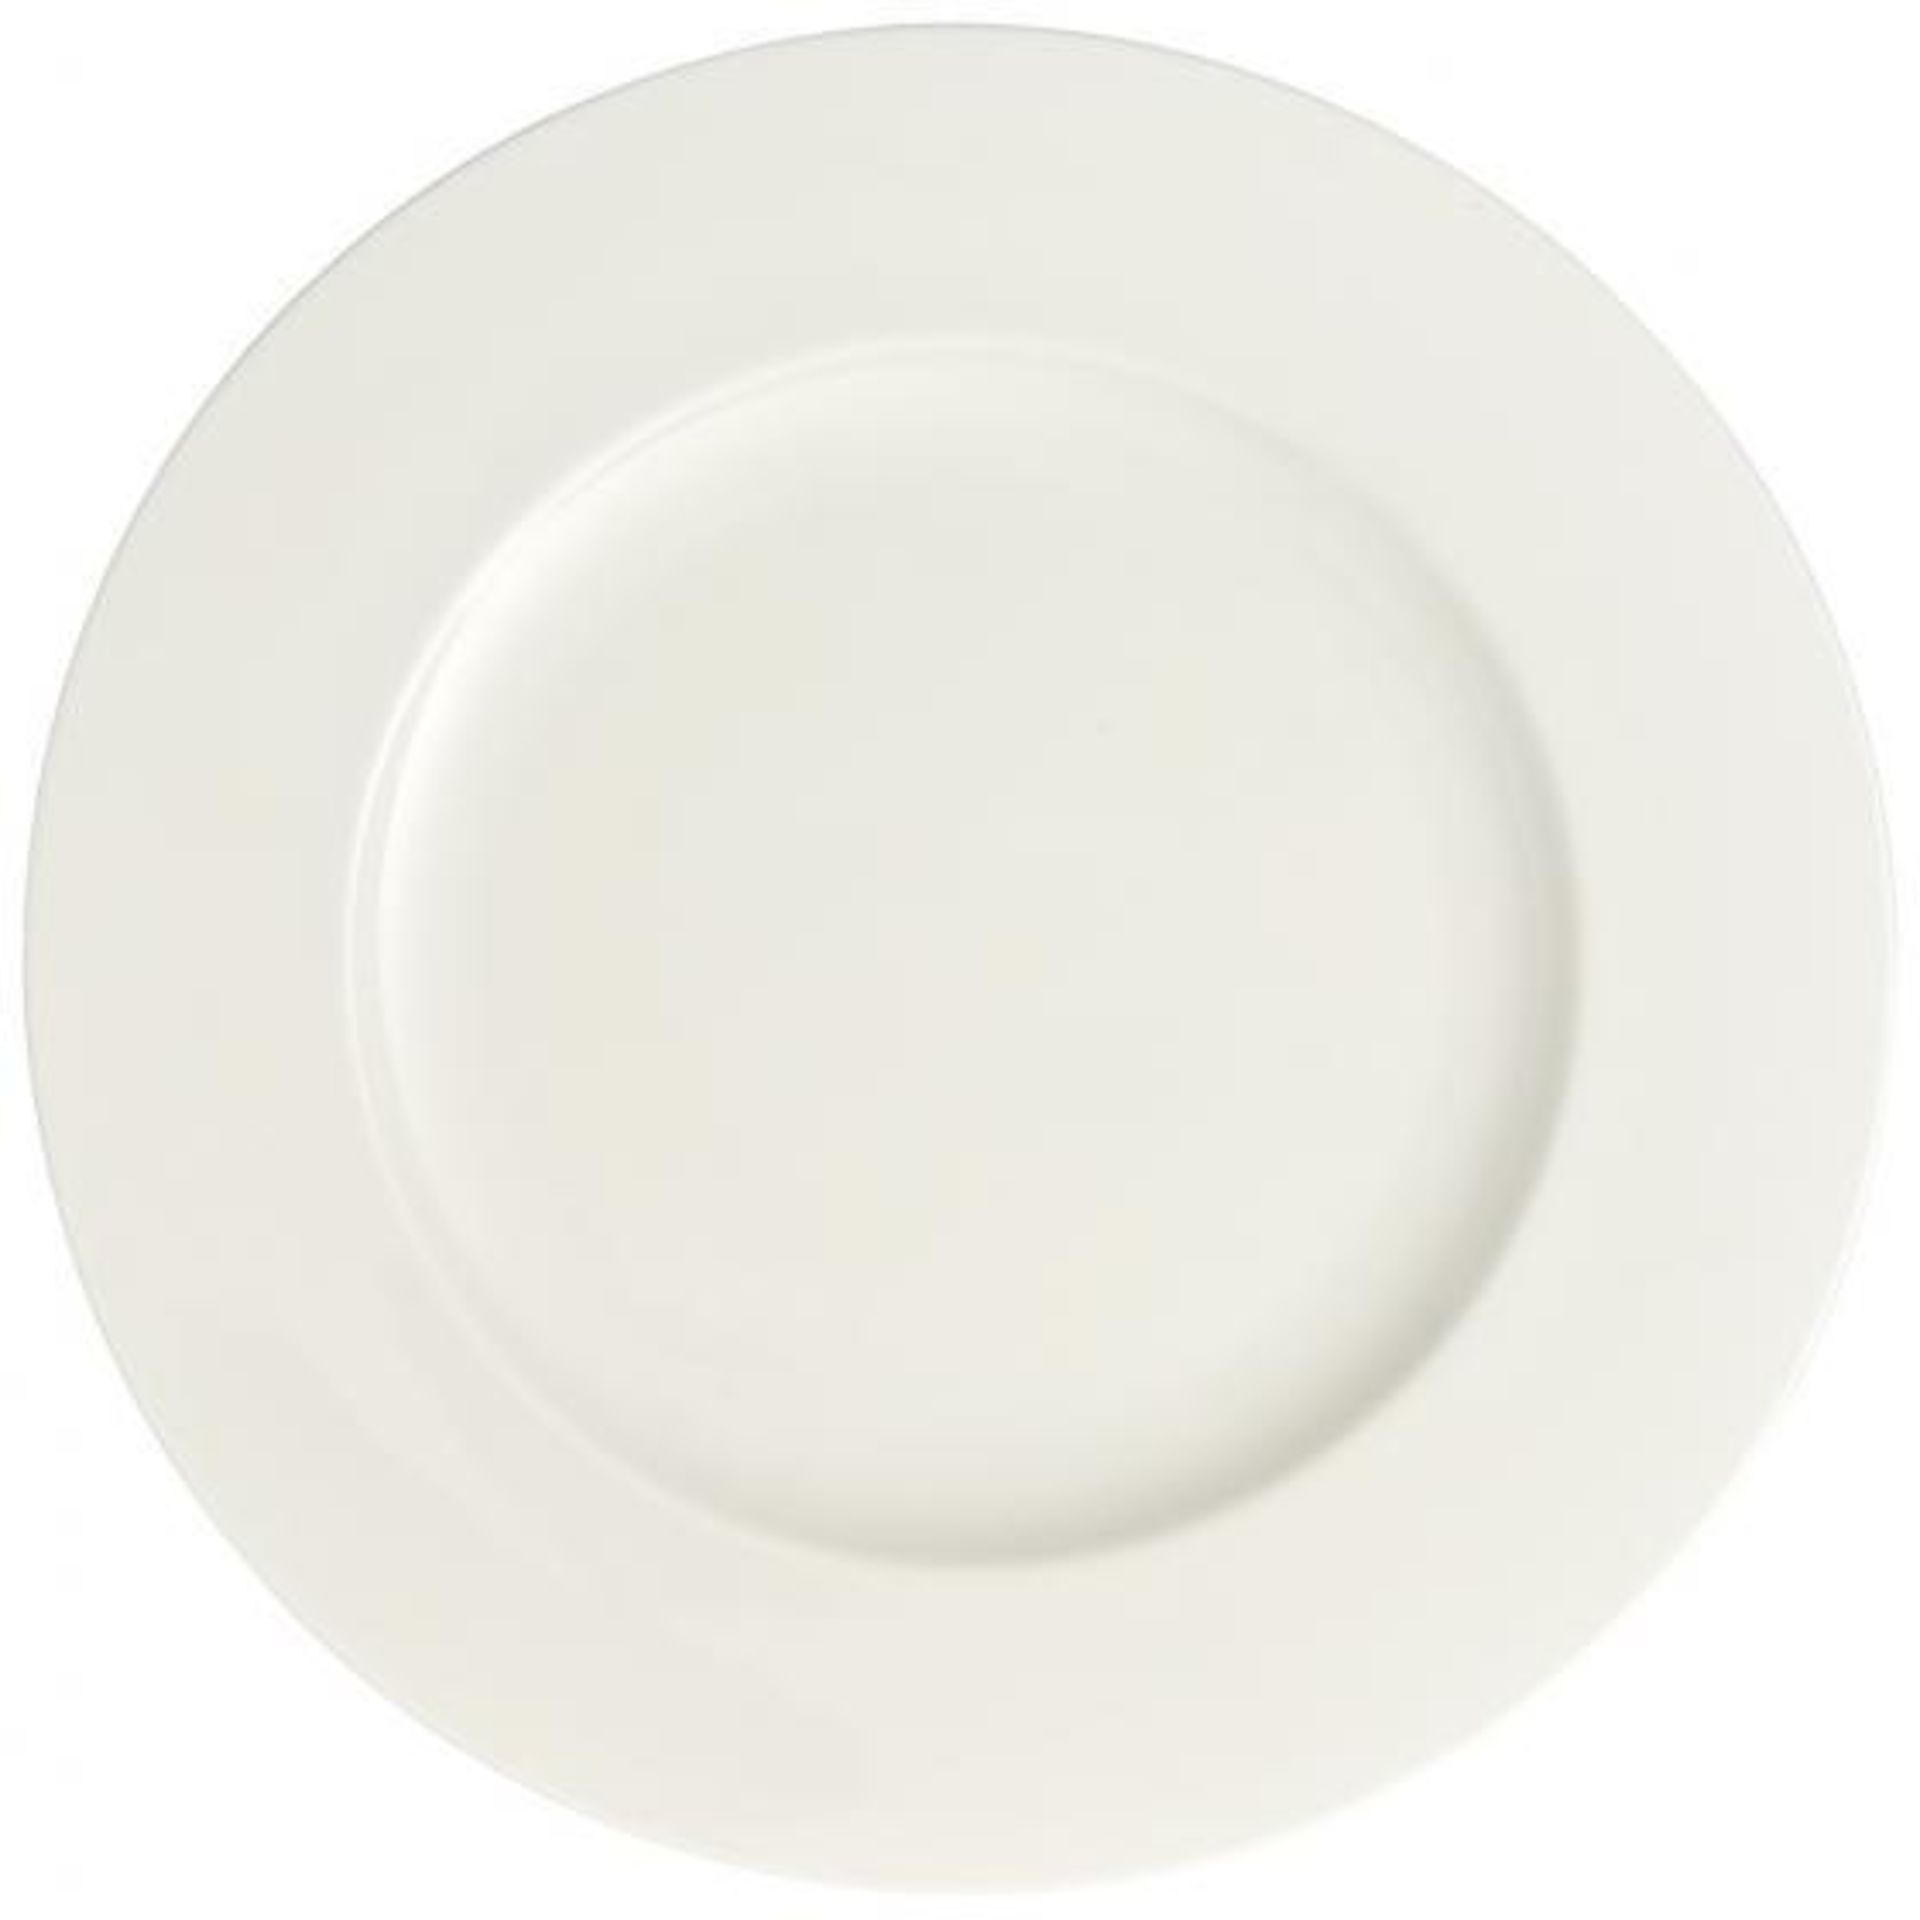 10 x Villeroy & Boch Royal Dinner Plate -290mm (29cm) - Ref: 1044122620 - New and unused without box